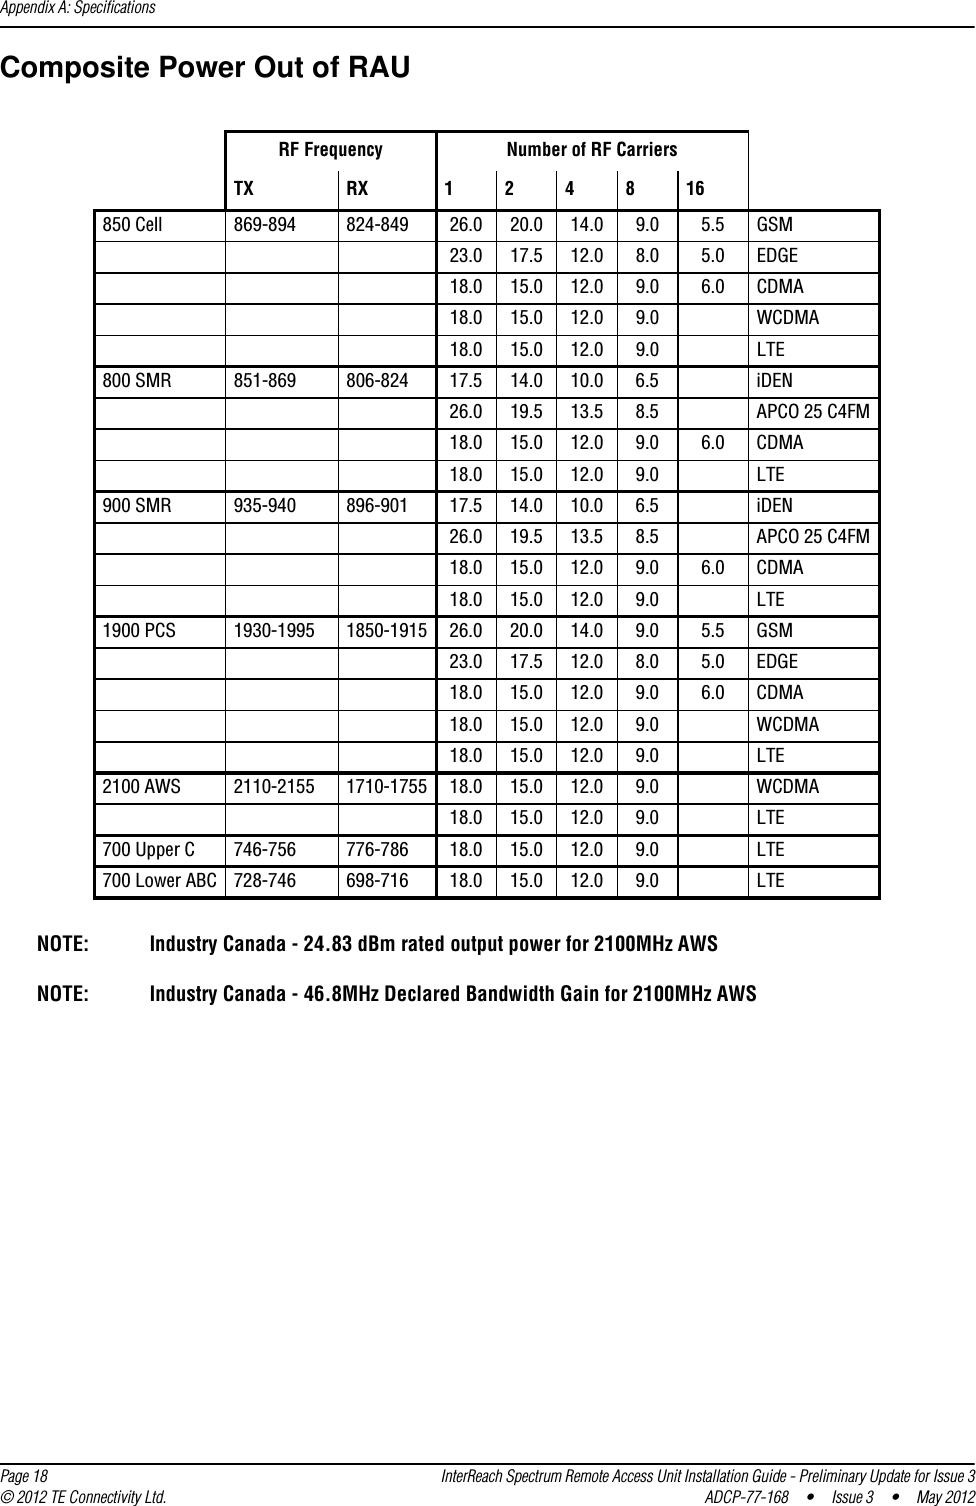 Appendix A: Specifications  Page 18 InterReach Spectrum Remote Access Unit Installation Guide - Preliminary Update for Issue 3© 2012 TE Connectivity Ltd. ADCP-77-168 • Issue 3 • May 2012Composite Power Out of RAURF Frequency Number of RF CarriersTX RX 1 2 4 8 16850 Cell 869-894 824-849 26.0 20.0 14.0 9.0 5.5 GSM23.0 17.5 12.0 8.0 5.0 EDGE18.0 15.0 12.0 9.0 6.0 CDMA18.0 15.0 12.0 9.0 WCDMA18.0 15.0 12.0 9.0 LTE800 SMR 851-869 806-824 17.5 14.0 10.0 6.5 iDEN26.0 19.5 13.5 8.5 APCO 25 C4FM18.0 15.0 12.0 9.0 6.0 CDMA18.0 15.0 12.0 9.0 LTE900 SMR 935-940 896-901 17.5 14.0 10.0 6.5 iDEN26.0 19.5 13.5 8.5 APCO 25 C4FM18.0 15.0 12.0 9.0 6.0 CDMA18.0 15.0 12.0 9.0 LTE1900 PCS 1930-1995 1850-1915 26.0 20.0 14.0 9.0 5.5 GSM23.0 17.5 12.0 8.0 5.0 EDGE18.0 15.0 12.0 9.0 6.0 CDMA18.0 15.0 12.0 9.0 WCDMA18.0 15.0 12.0 9.0 LTE2100 AWS 2110-2155 1710-1755 18.0 15.0 12.0 9.0 WCDMA18.0 15.0 12.0 9.0 LTE700 Upper C 746-756 776-786 18.0 15.0 12.0 9.0 LTE700 Lower ABC 728-746 698-716 18.0 15.0 12.0 9.0 LTENOTE: Industry Canada - 24.83 dBm rated output power for 2100MHz AWSNOTE: Industry Canada - 46.8MHz Declared Bandwidth Gain for 2100MHz AWS